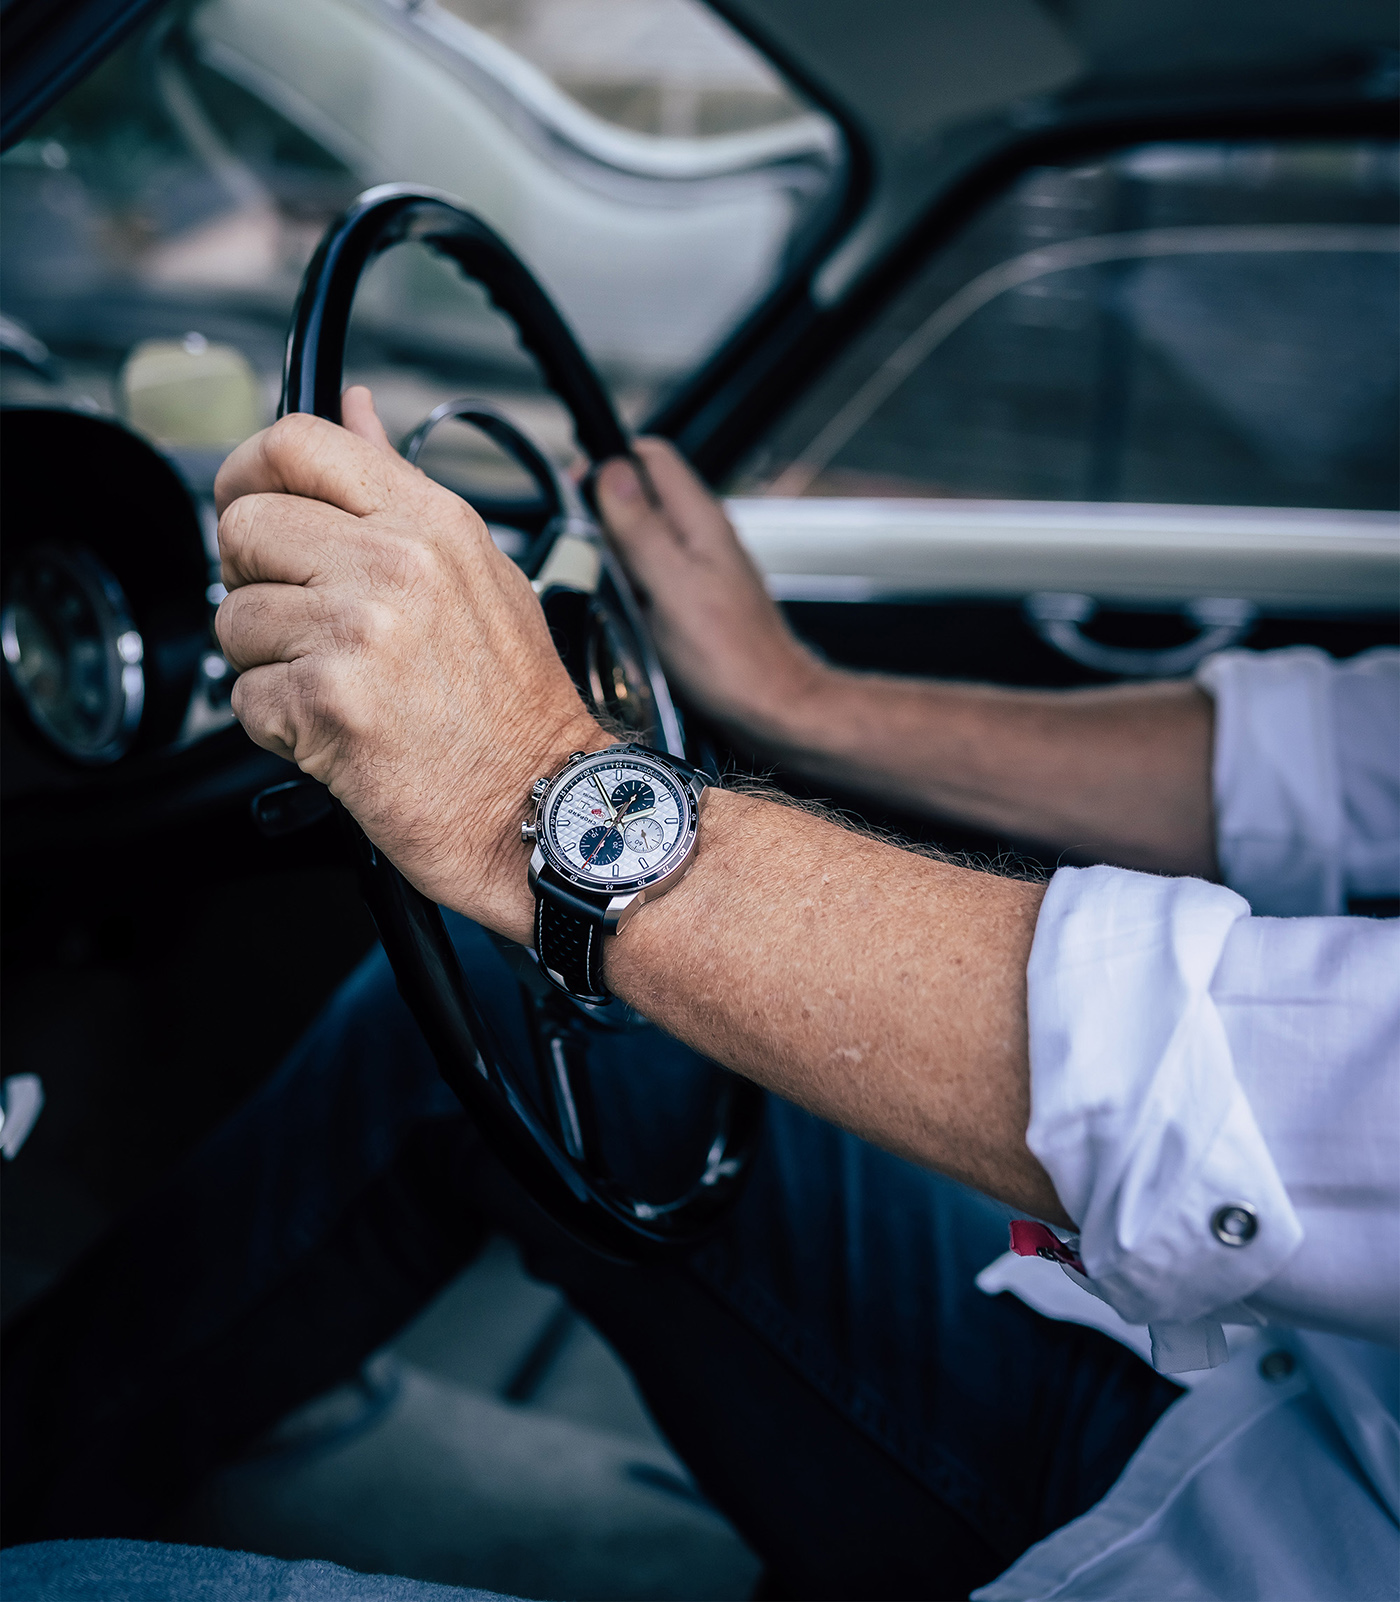 Getting down and dusty with Chopard and Bamford's Mille Miglia GTS